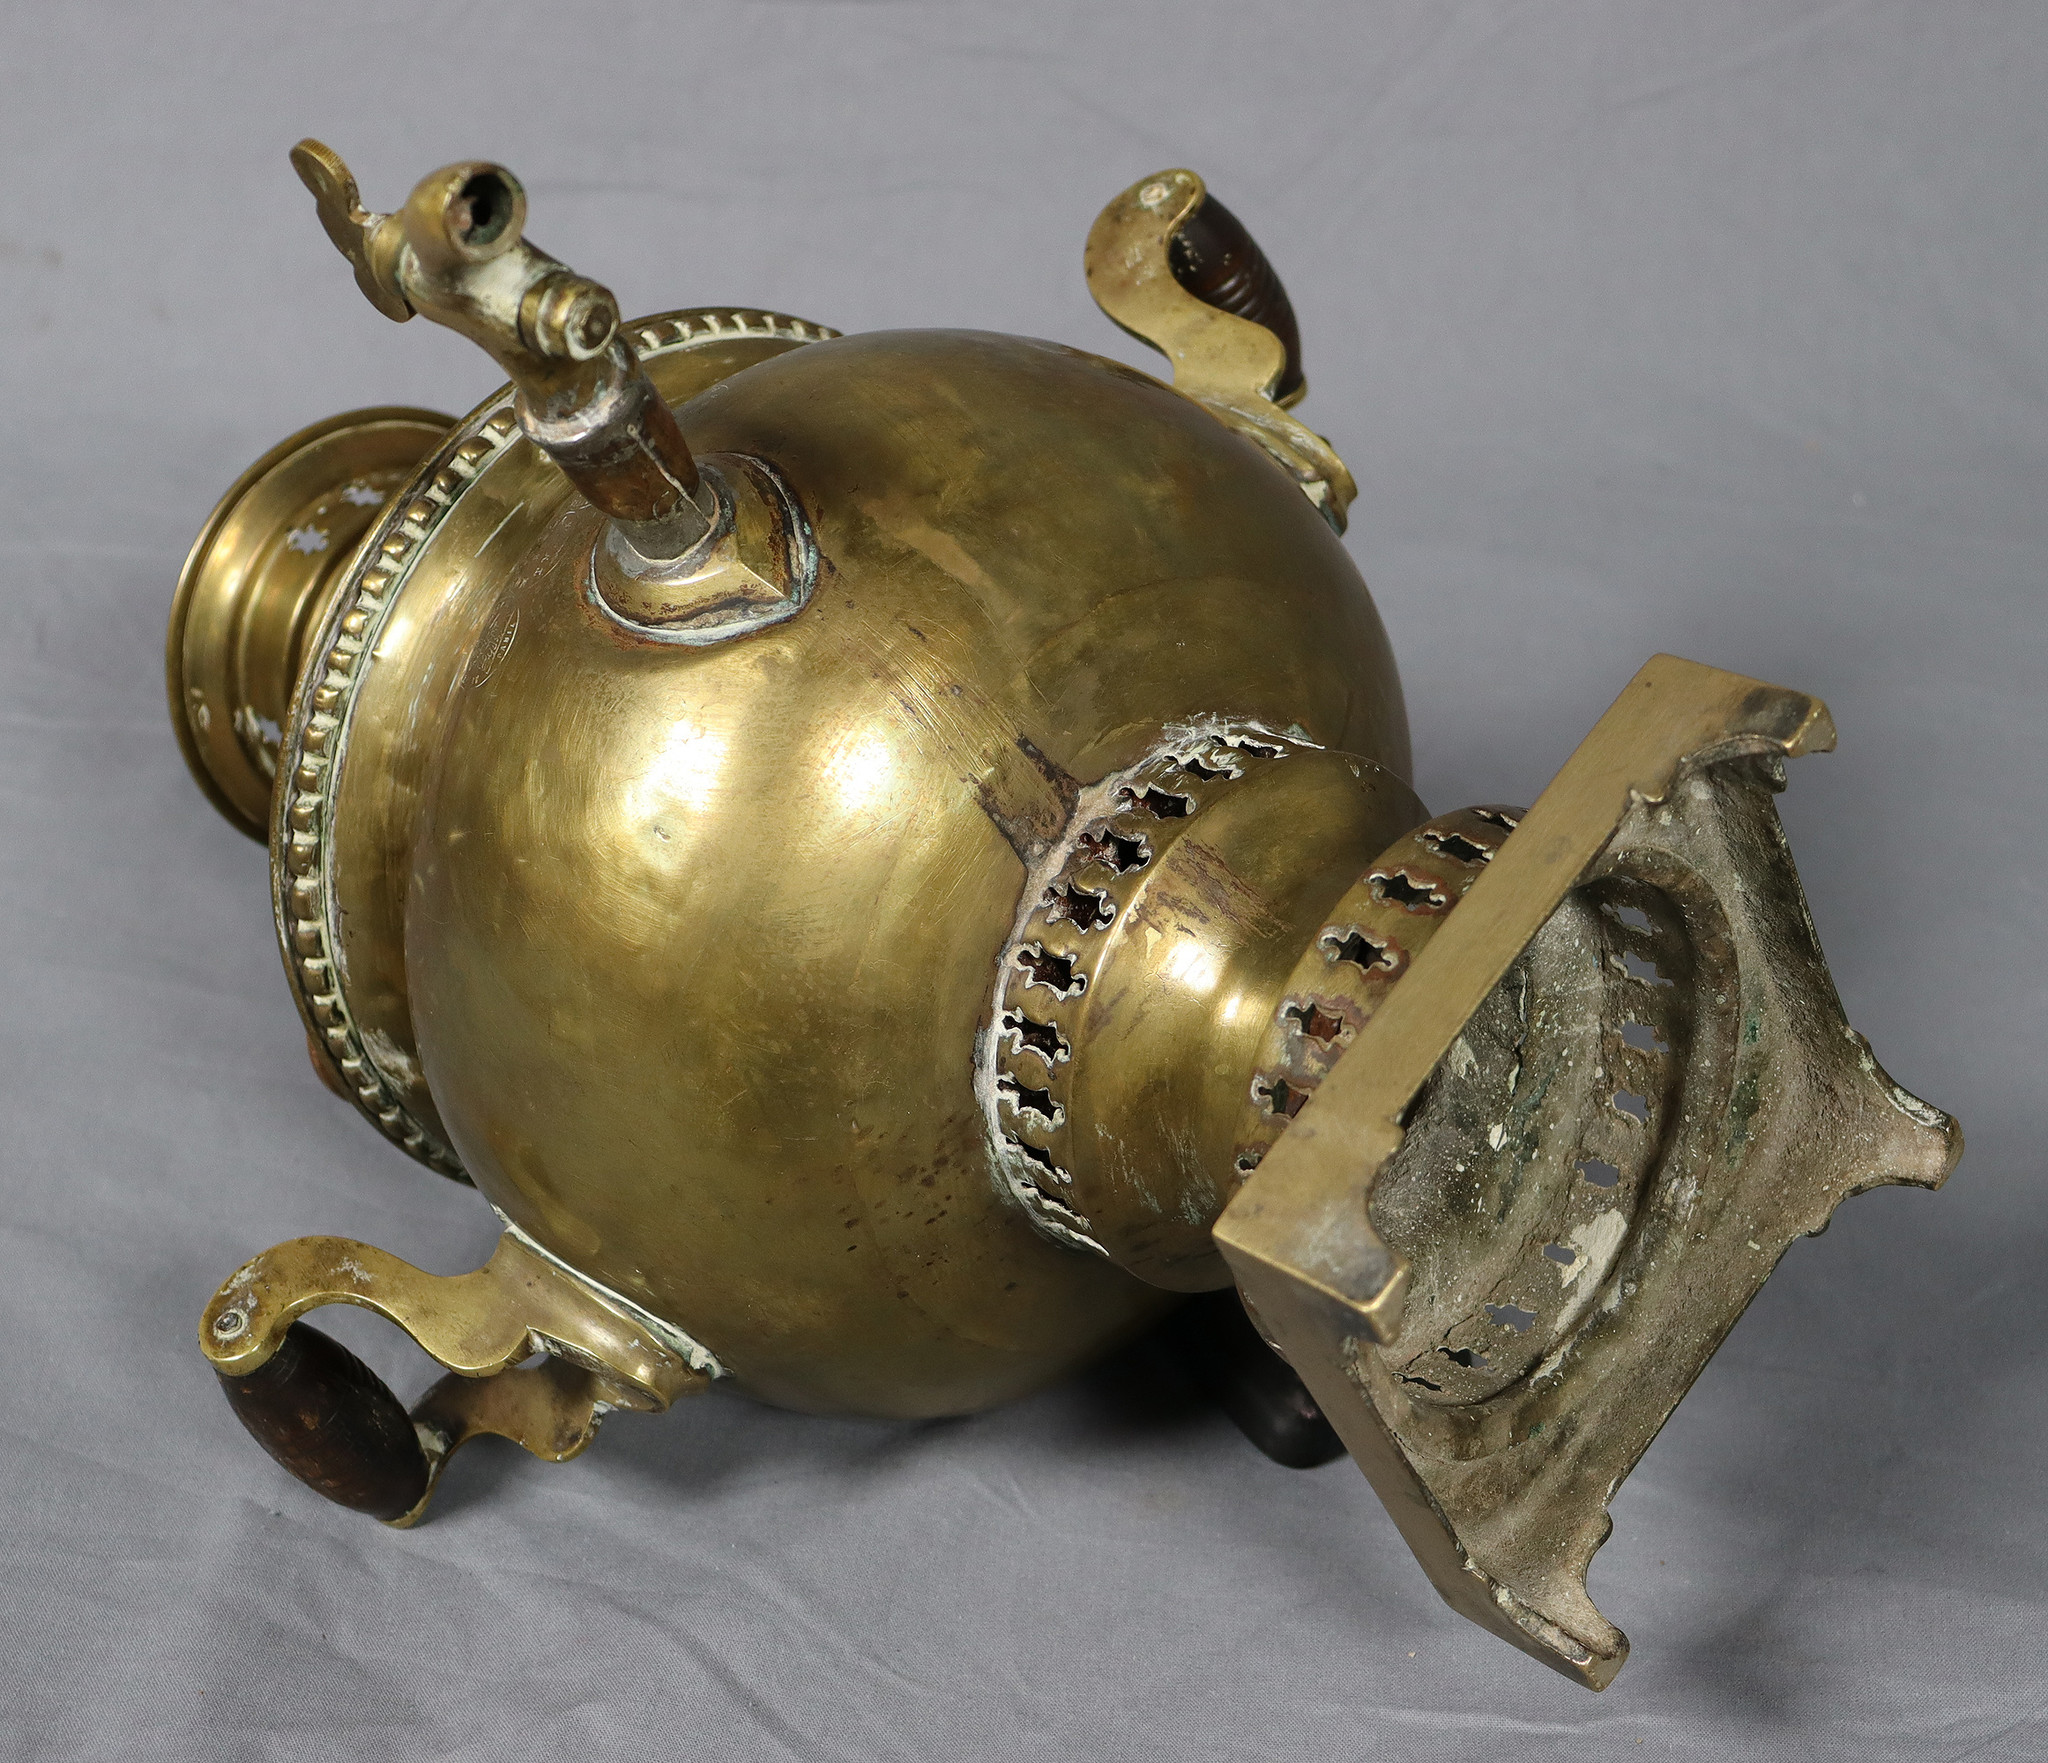 Antique Imperial Russian Tula charcoal Brass Samovar withe  stamp No:22/2